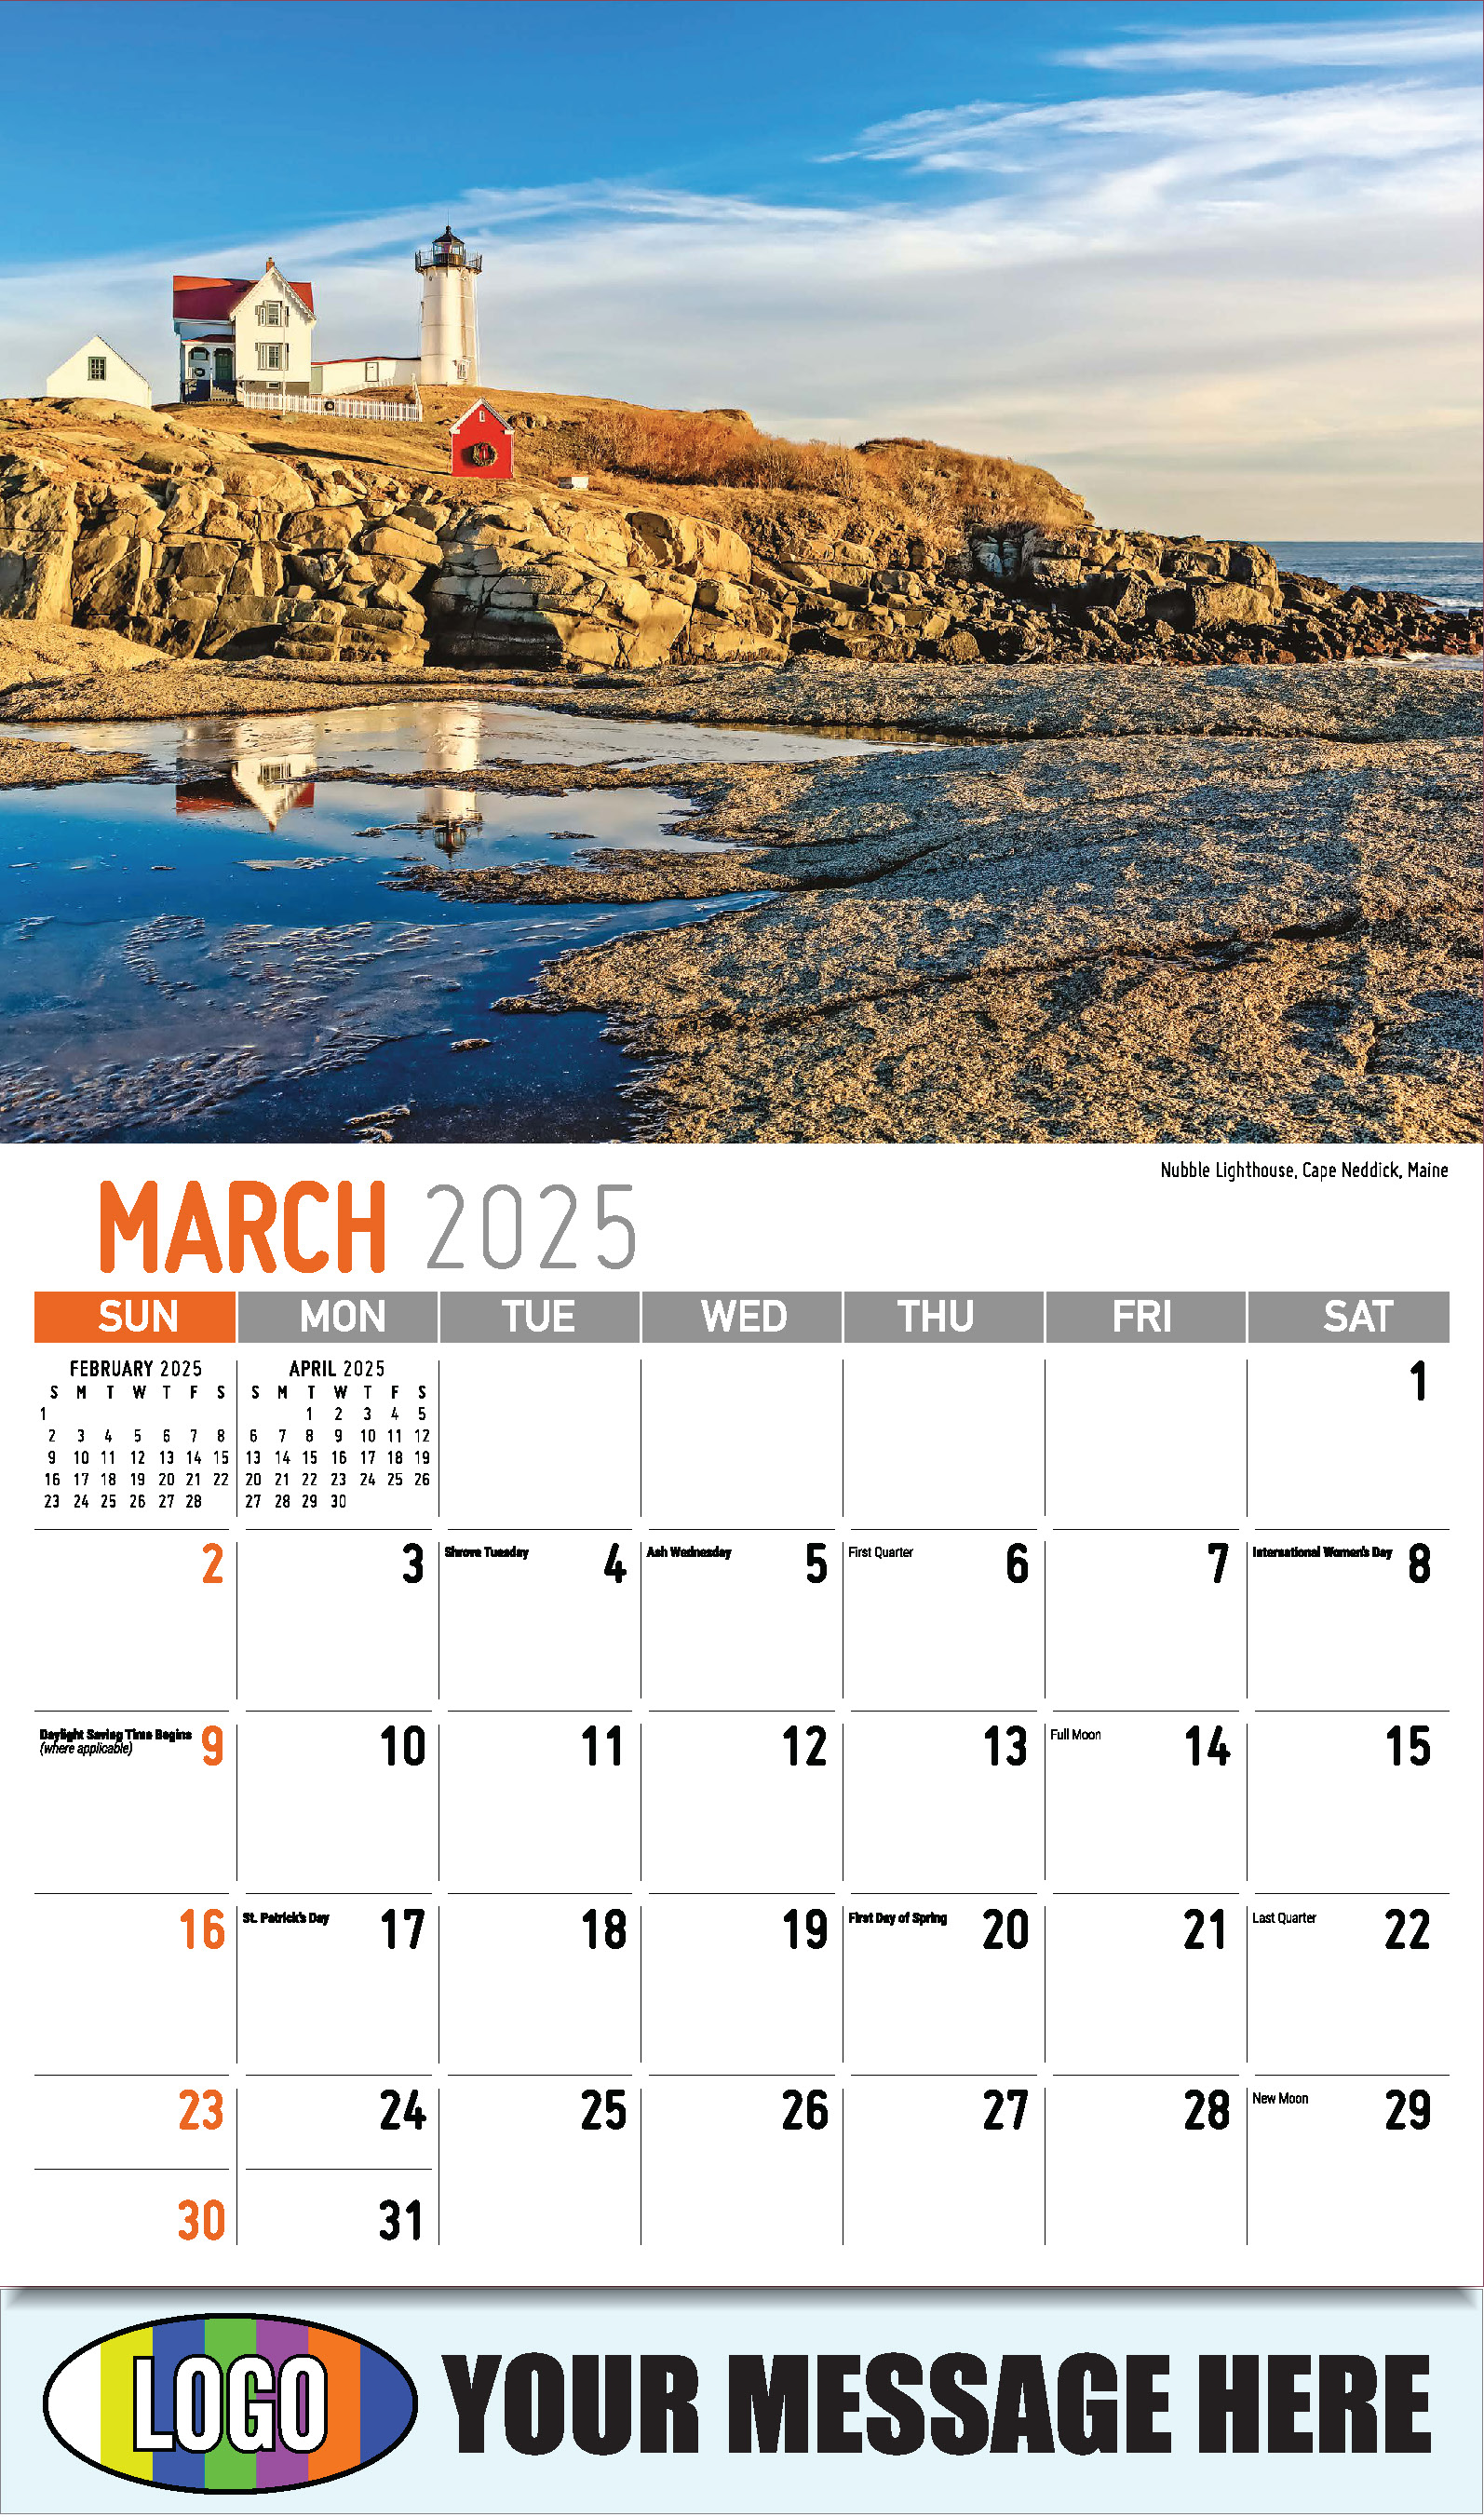 Scenes of New England 2025 Business Advertising Wall Calendar - March